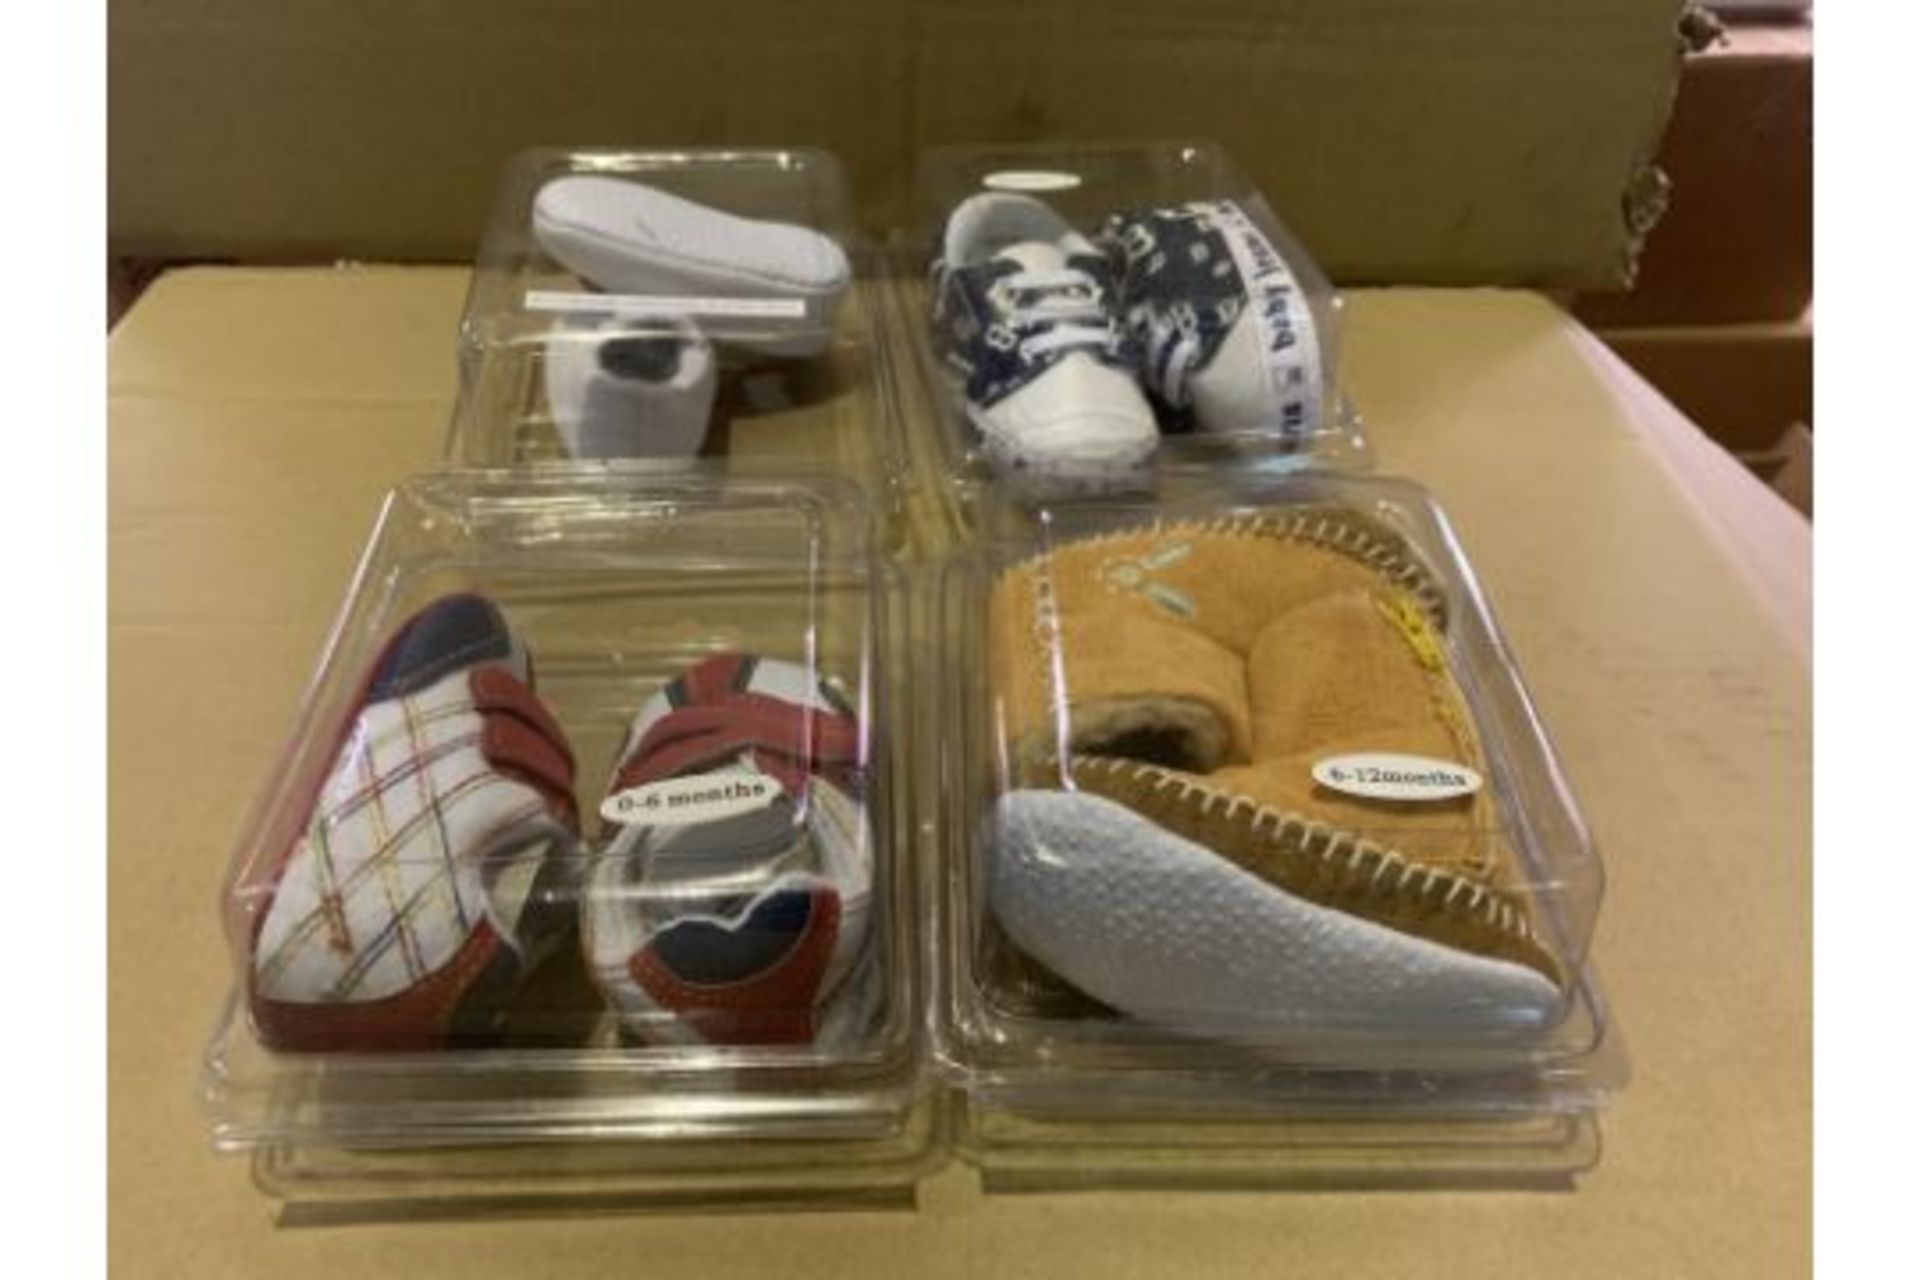 (NO VAT) 15 X BRAND NEW BABIES SHOES IN VARIOUS DESIGNS AND VARIOUS SIZES S1R